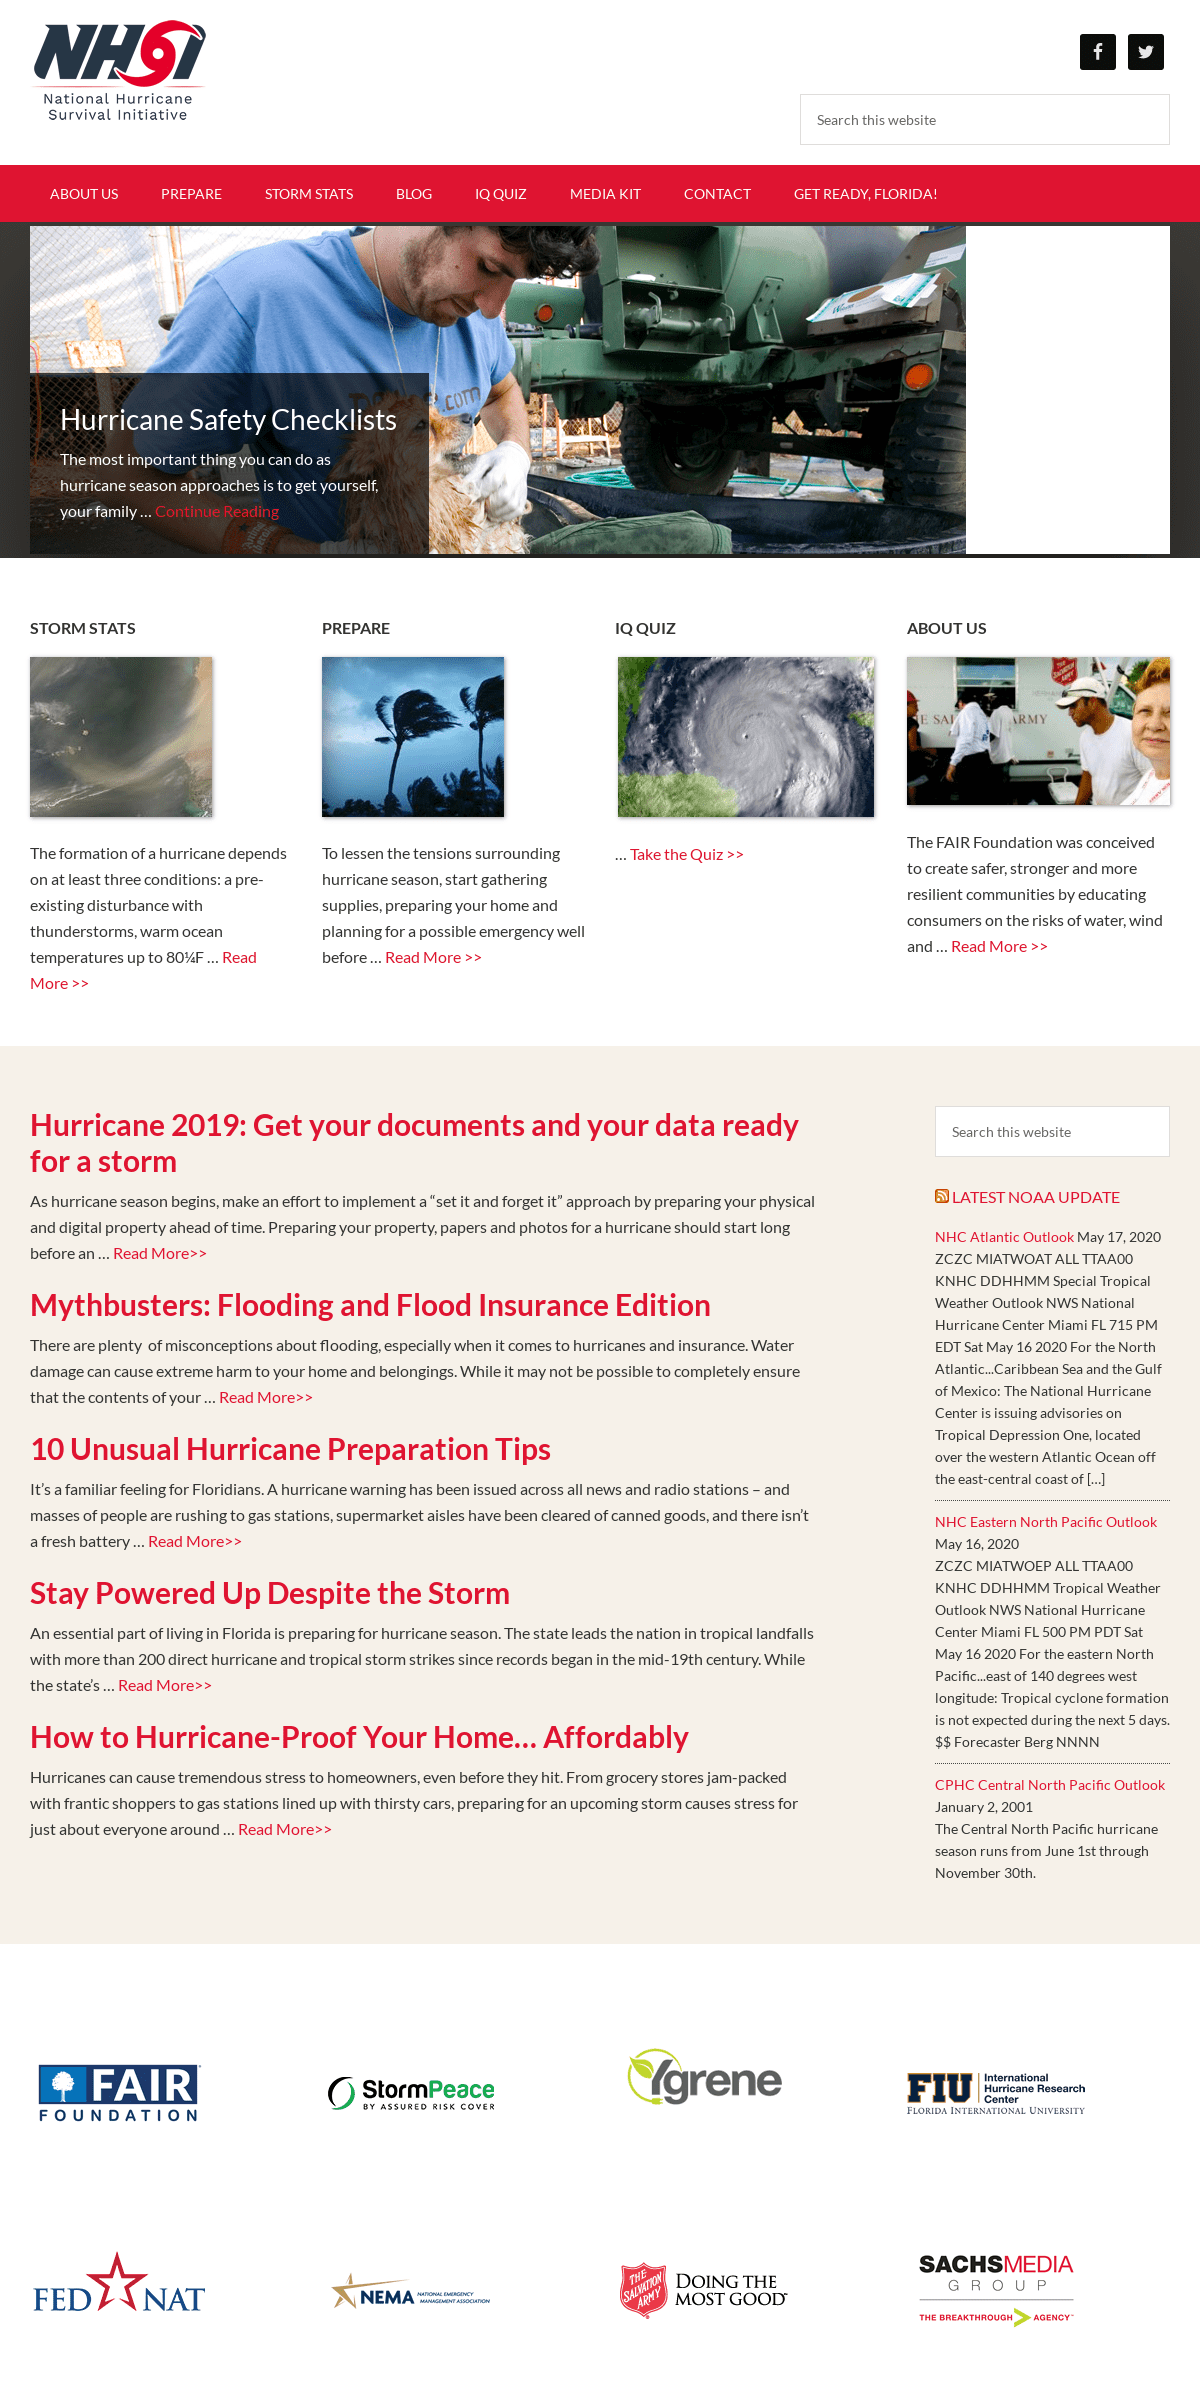 A complete backup of hurricanesafety.org